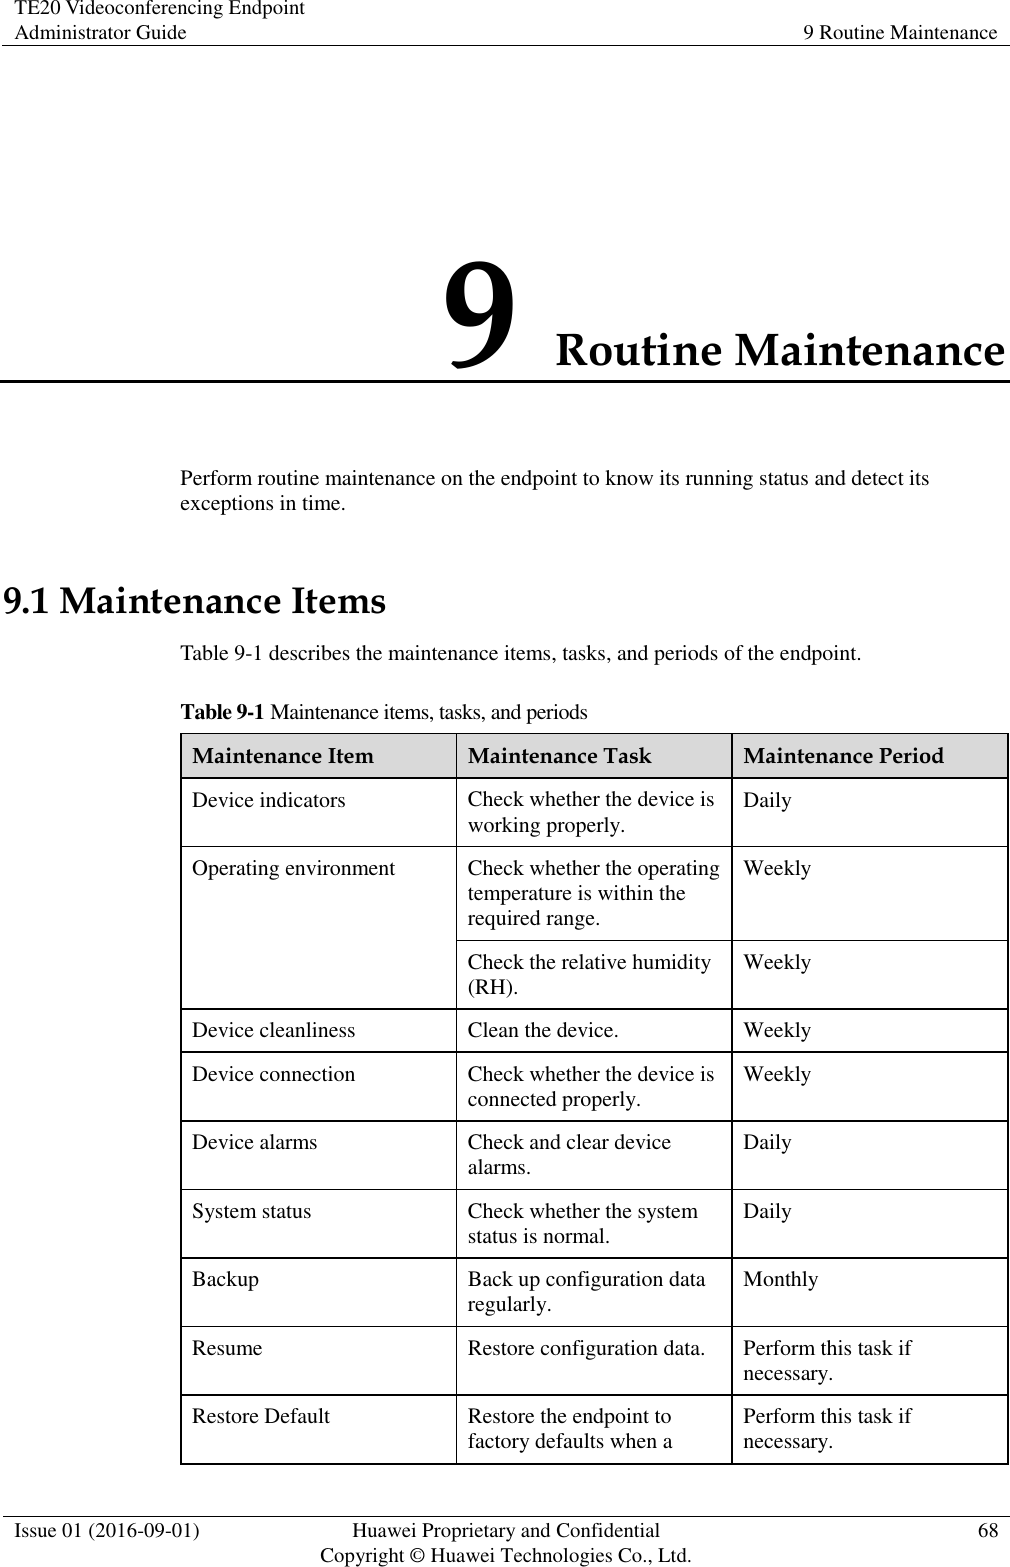 TE20 Videoconferencing Endpoint Administrator Guide 9 Routine Maintenance  Issue 01 (2016-09-01) Huawei Proprietary and Confidential                                     Copyright © Huawei Technologies Co., Ltd. 68  9 Routine Maintenance Perform routine maintenance on the endpoint to know its running status and detect its exceptions in time. 9.1 Maintenance Items Table 9-1 describes the maintenance items, tasks, and periods of the endpoint. Table 9-1 Maintenance items, tasks, and periods Maintenance Item Maintenance Task Maintenance Period Device indicators Check whether the device is working properly. Daily Operating environment Check whether the operating temperature is within the required range. Weekly Check the relative humidity (RH). Weekly Device cleanliness Clean the device. Weekly Device connection Check whether the device is connected properly. Weekly Device alarms Check and clear device alarms. Daily System status Check whether the system status is normal. Daily Backup Back up configuration data regularly. Monthly Resume Restore configuration data. Perform this task if necessary. Restore Default Restore the endpoint to factory defaults when a Perform this task if necessary. 